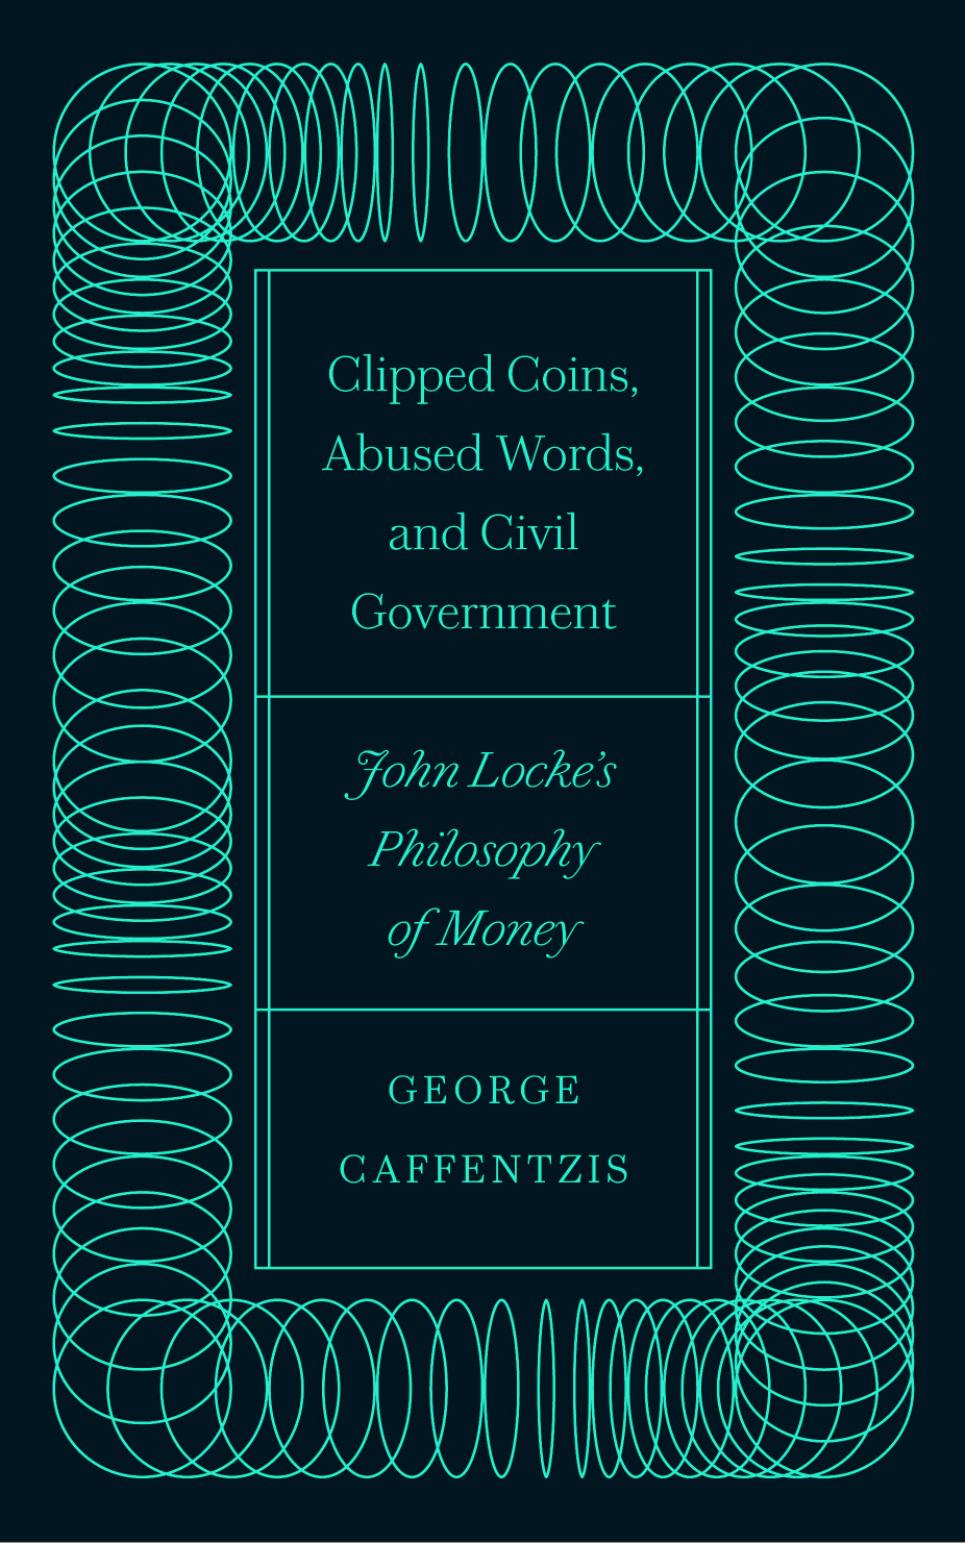 Clipped Coins, Abused Words, and Civil Government: John Locke's Philosophy of Money